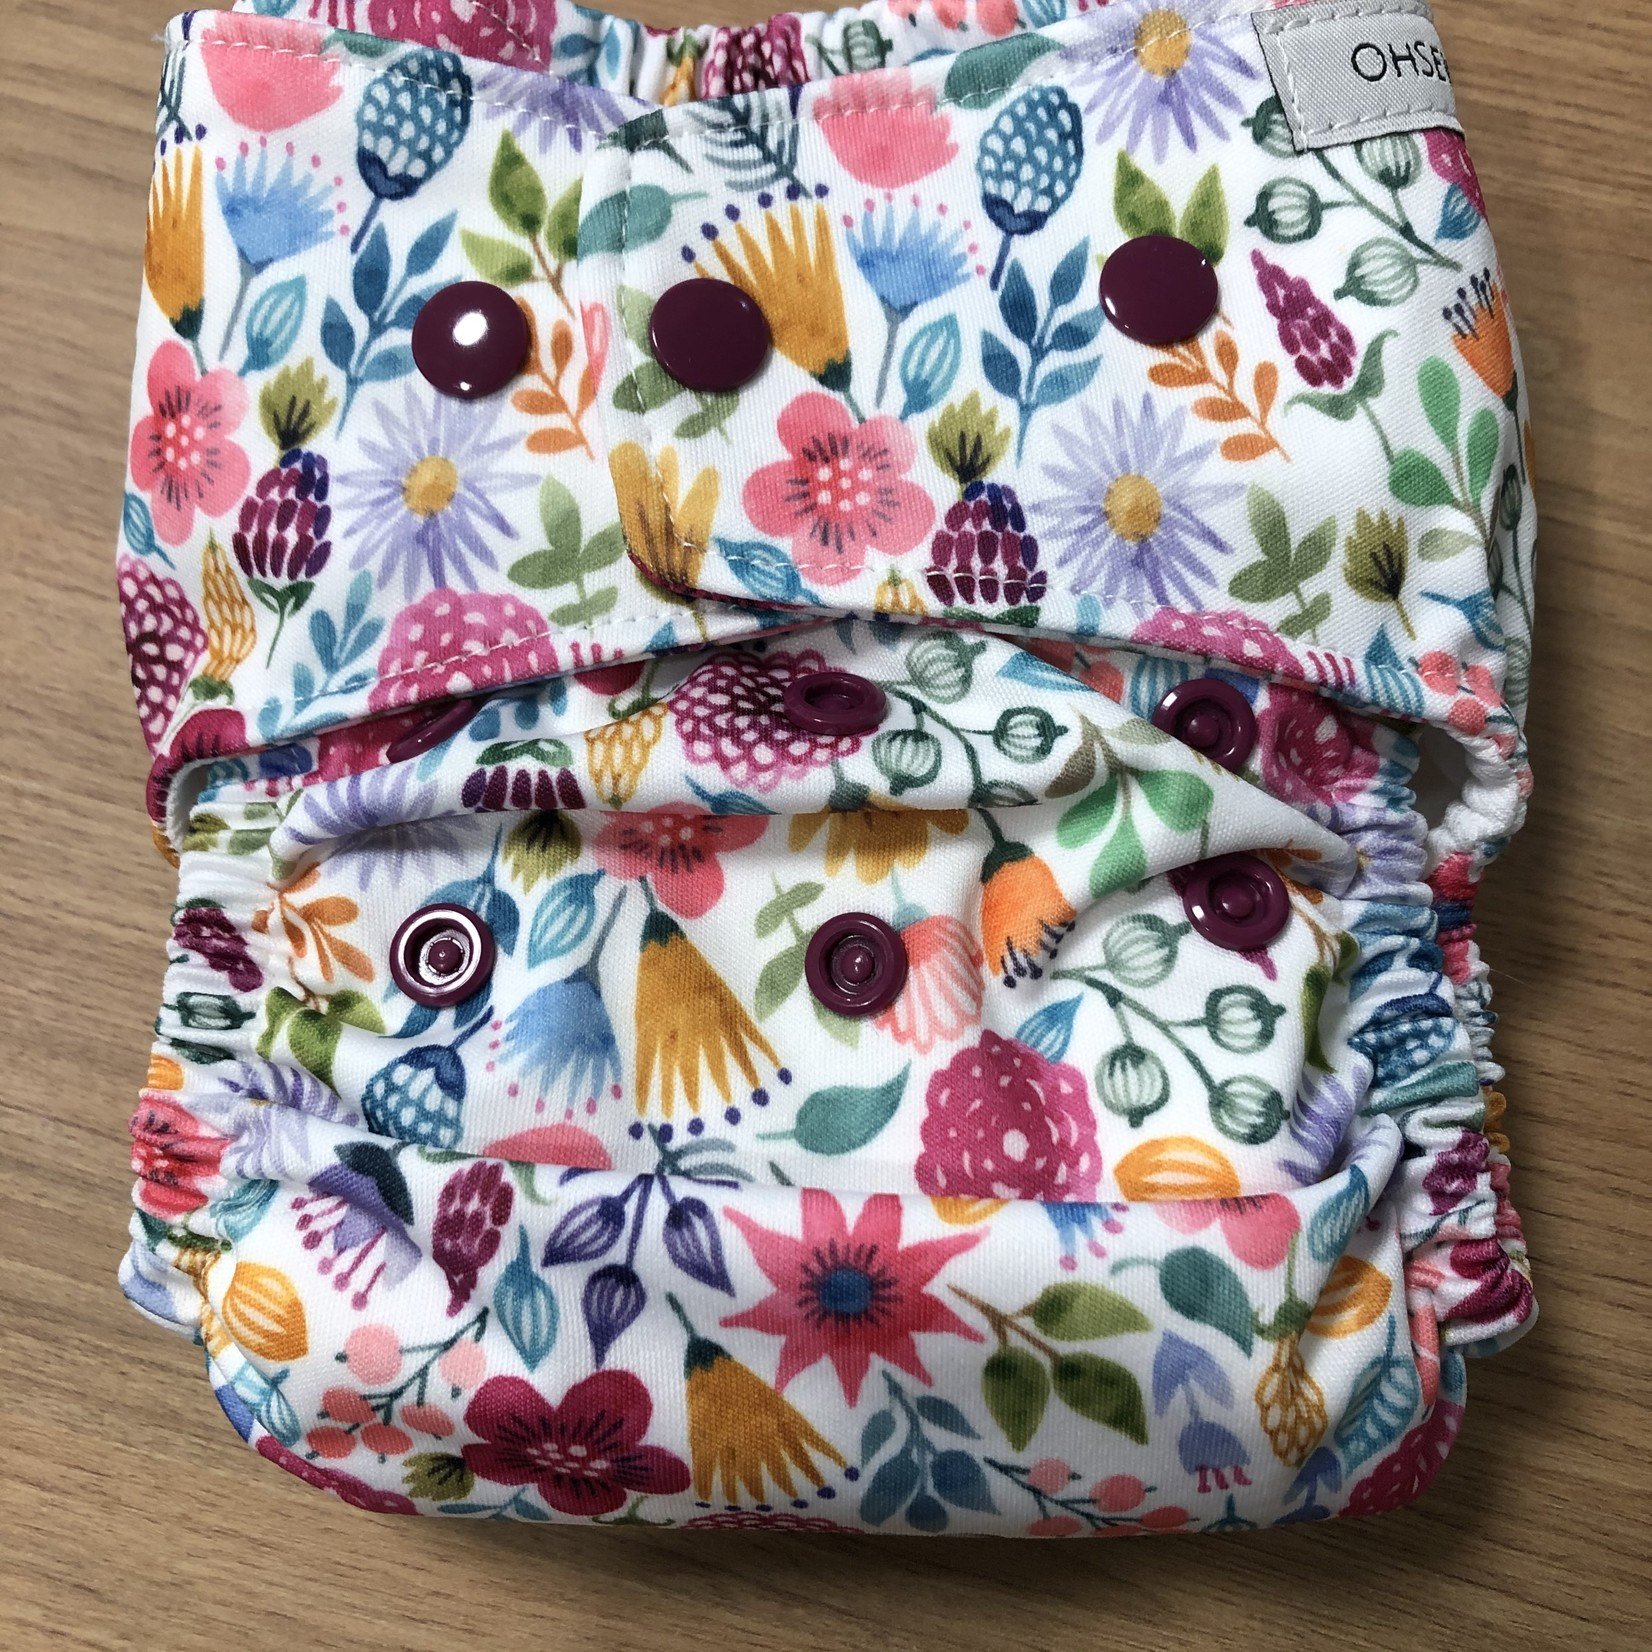 Oh Sew Creative Oh Sew Creative "Wild Floral" Single Row Nappy